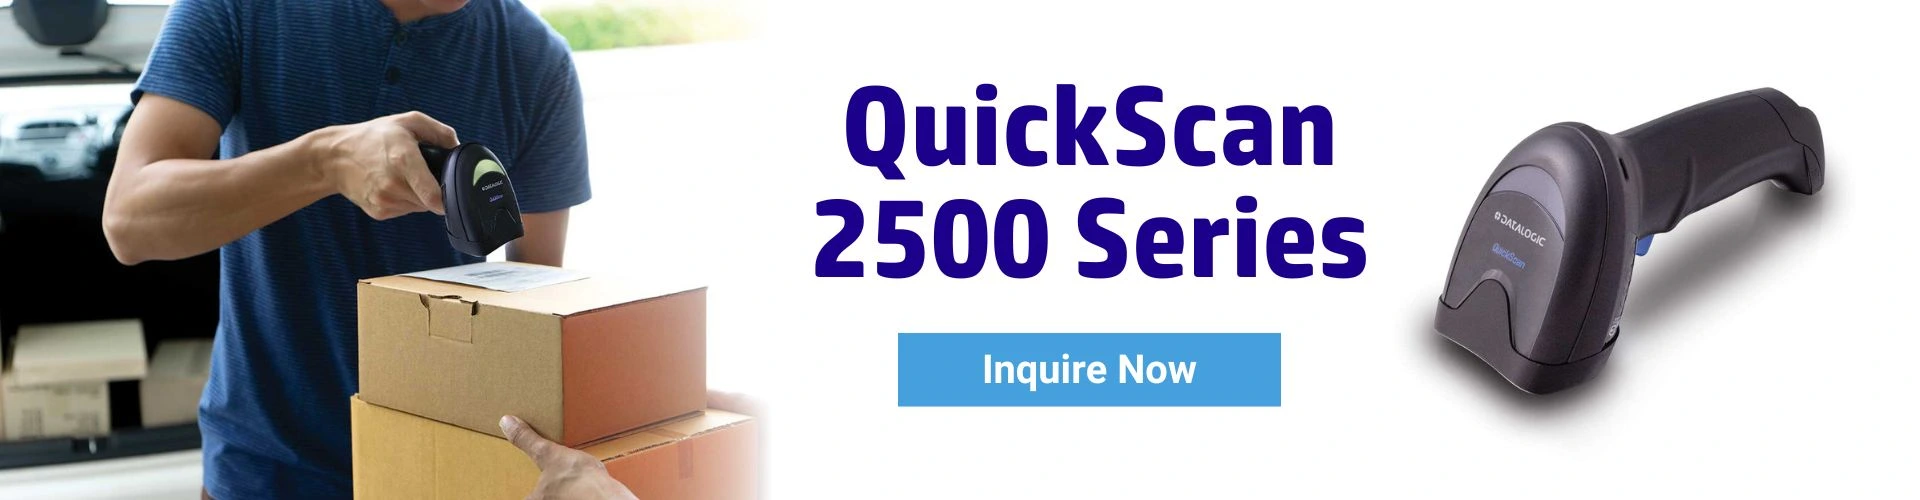 quick-scan-2500-series